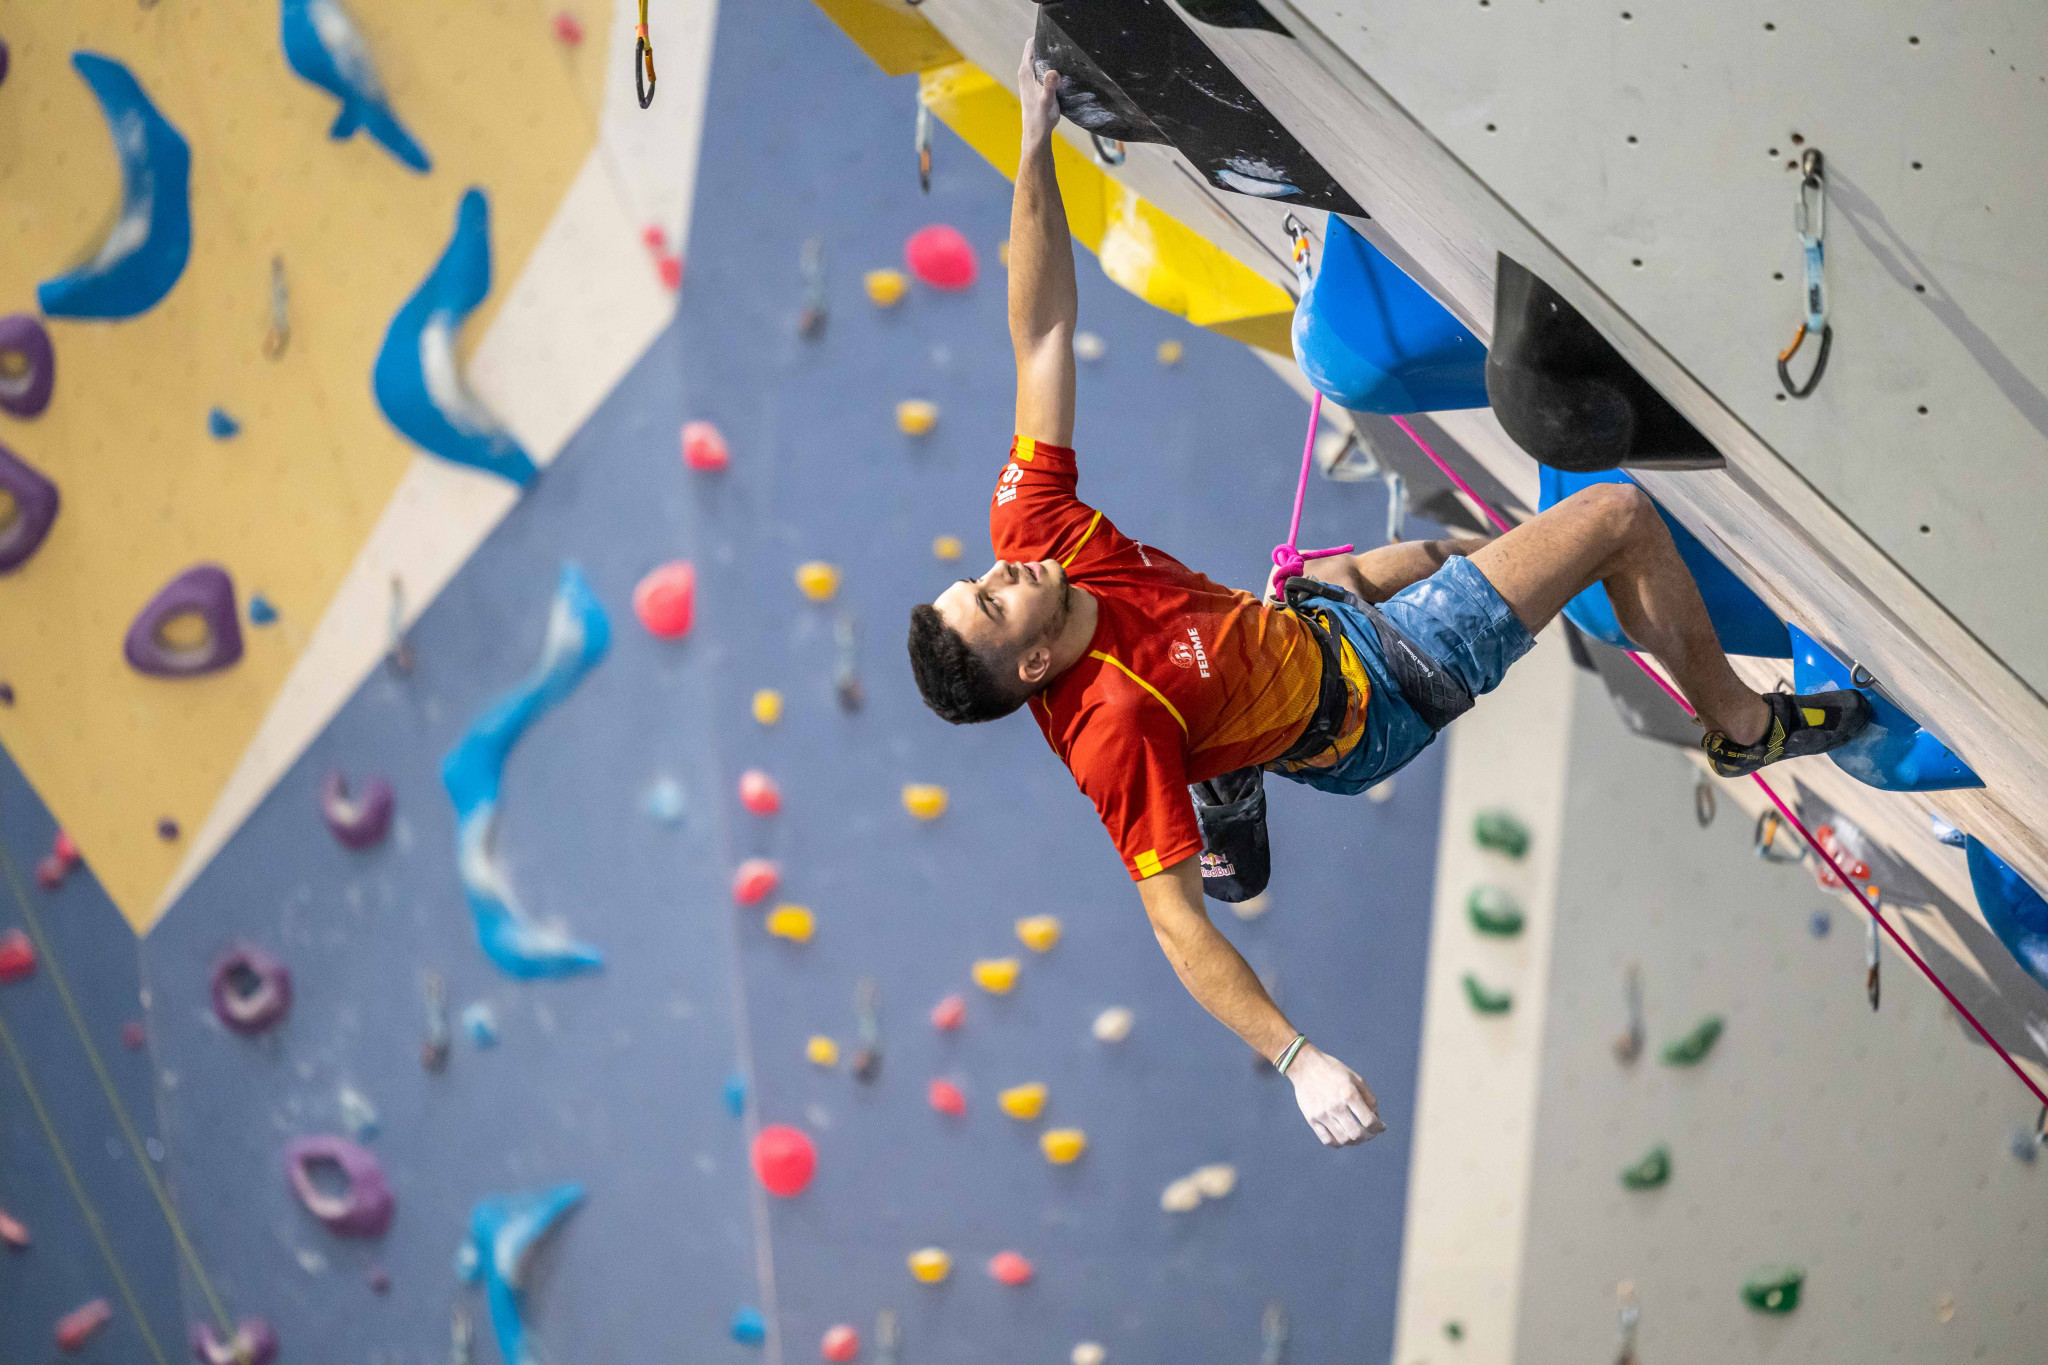 Olympic gold medallist Alberto Ginés López impressed in the new format ©Jan Virt/IFSC